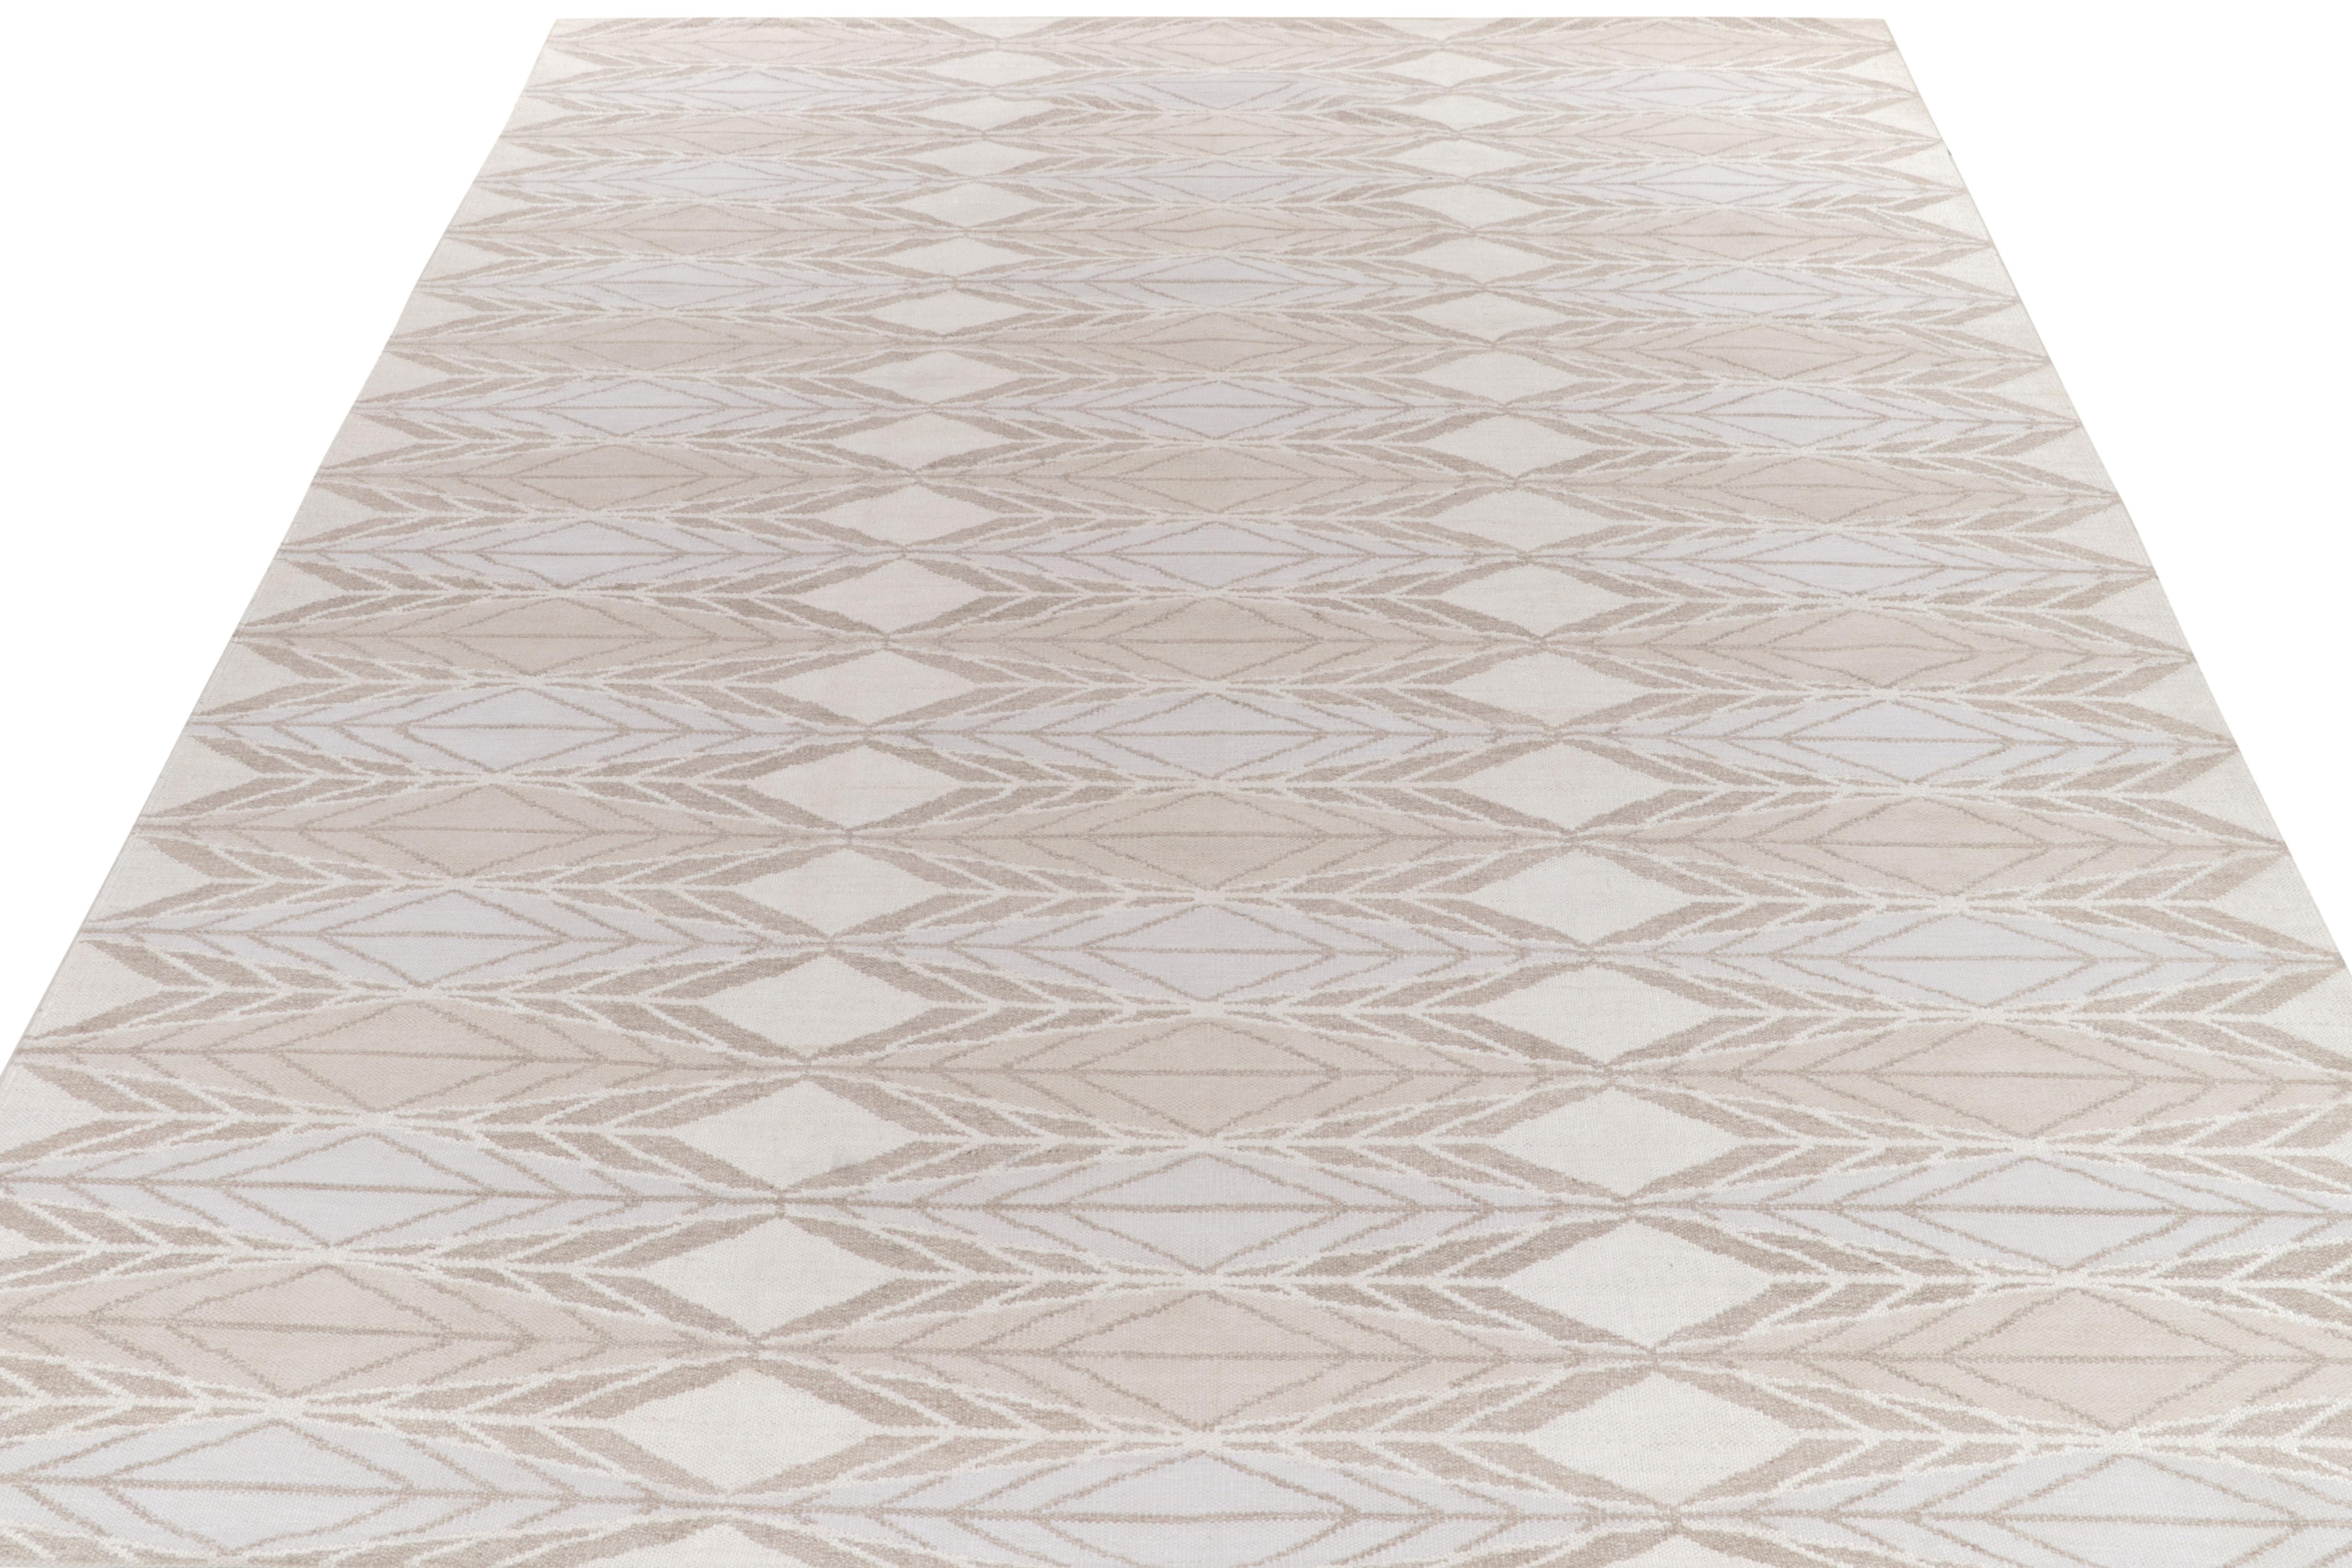 Handwoven in fine quality wool, a 11x15 kilim reflecting our passion for Scandinavian flatweaves, joining our titular award-winning collection. The rug features geometric repetition in sublime, chic blue & brown with off-white accents enjoying